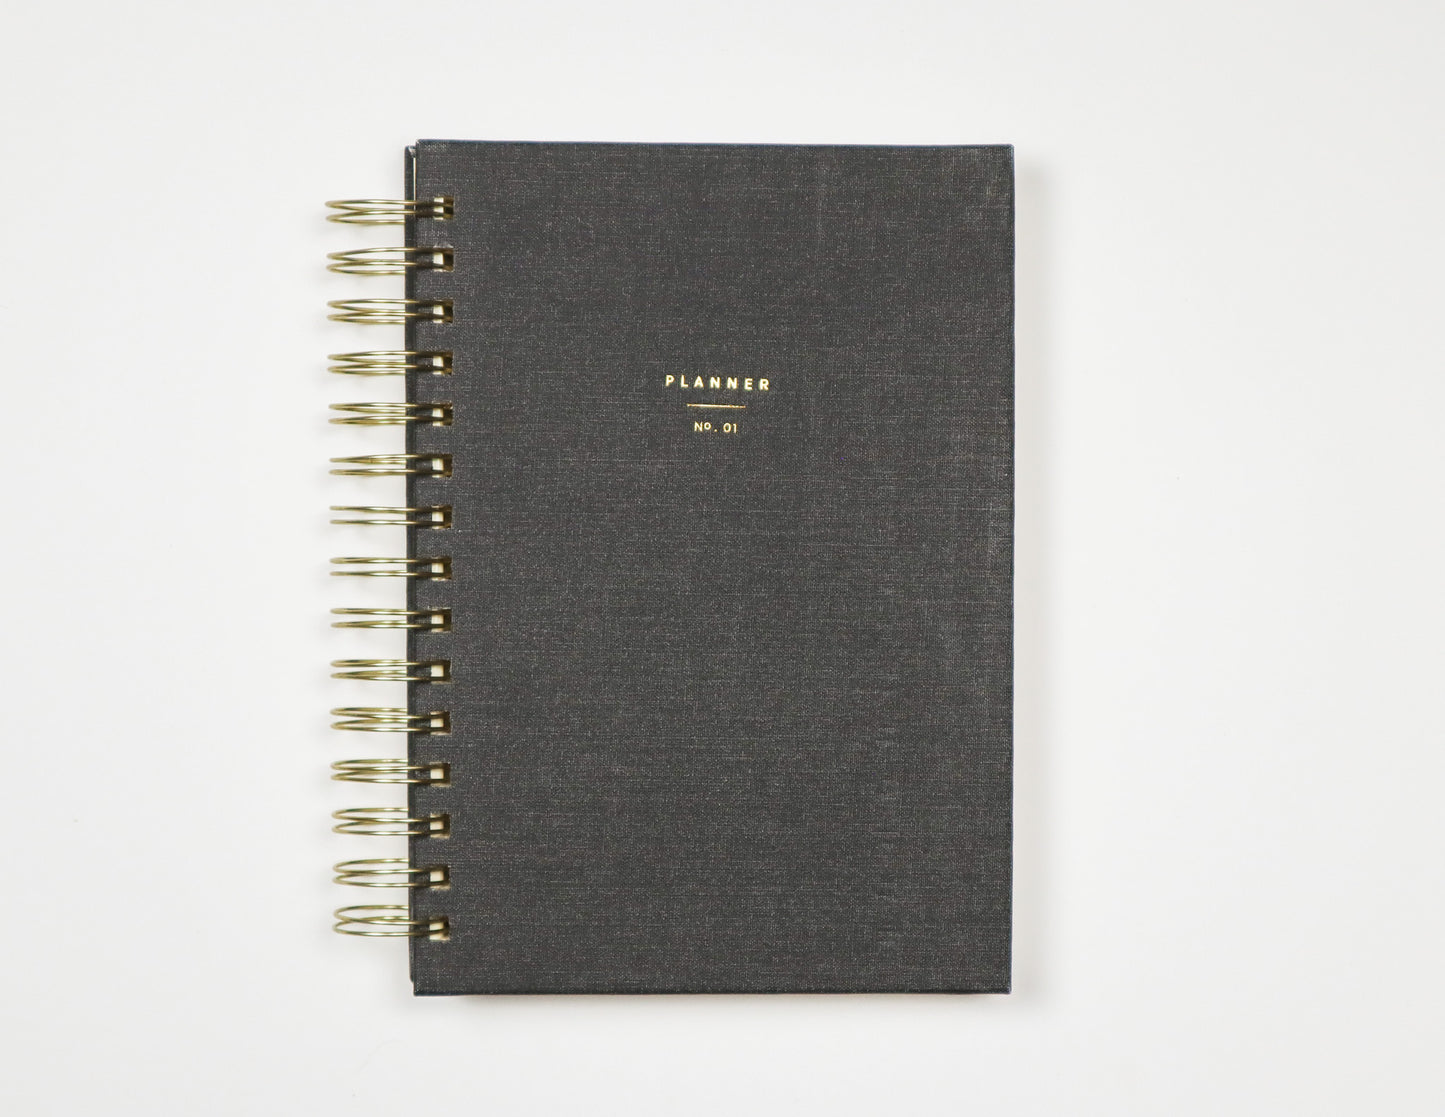 Undated Weekly Planner in Charcoal